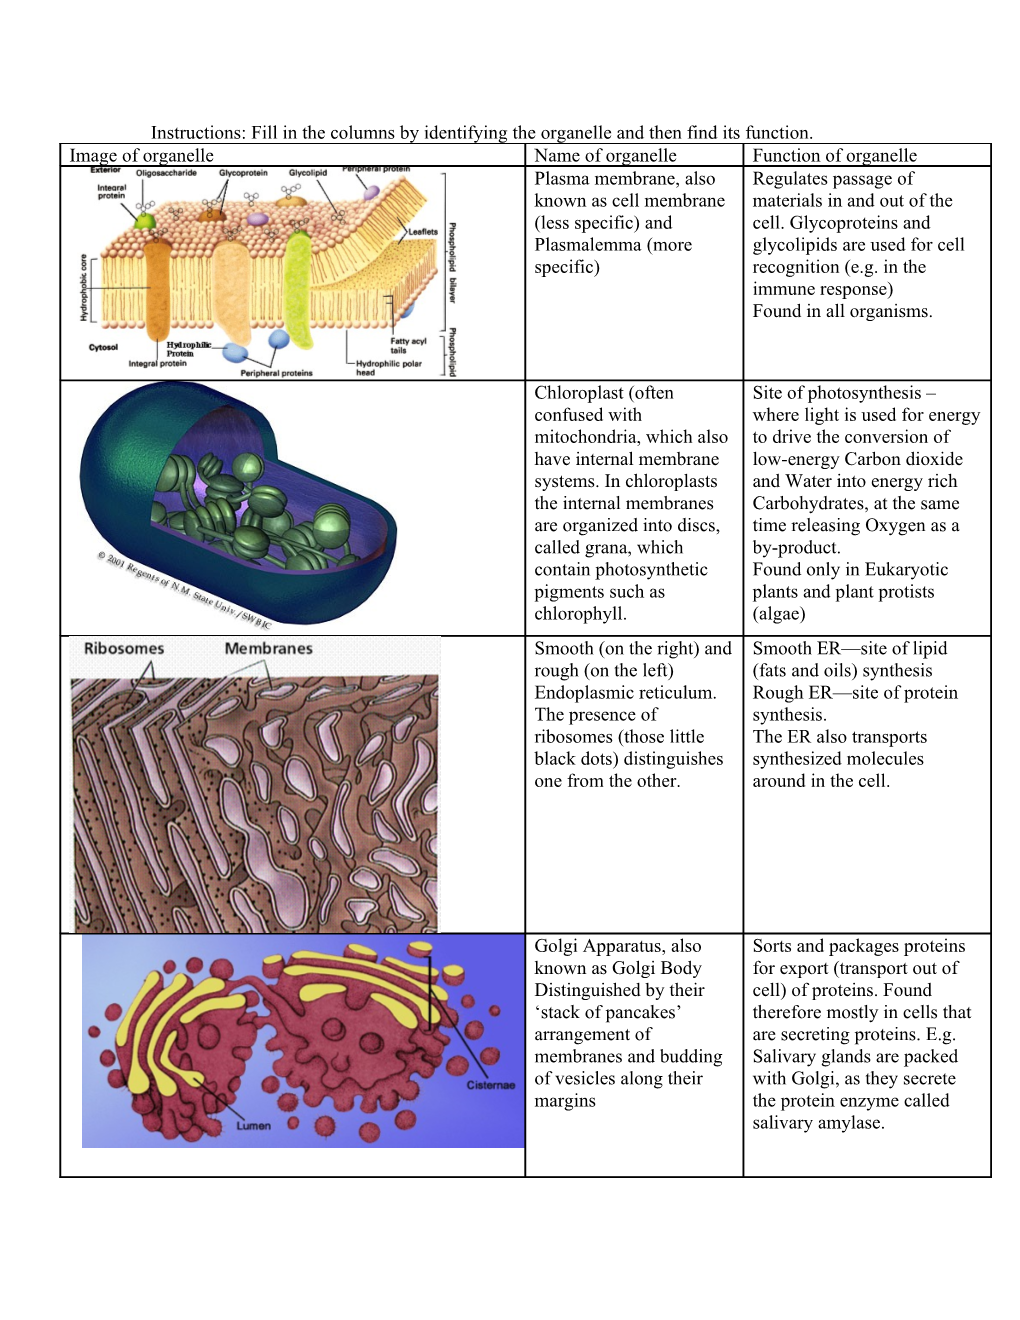 Instructions: Fill in the Columns by Identifying the Organelle and Then Find Its Function